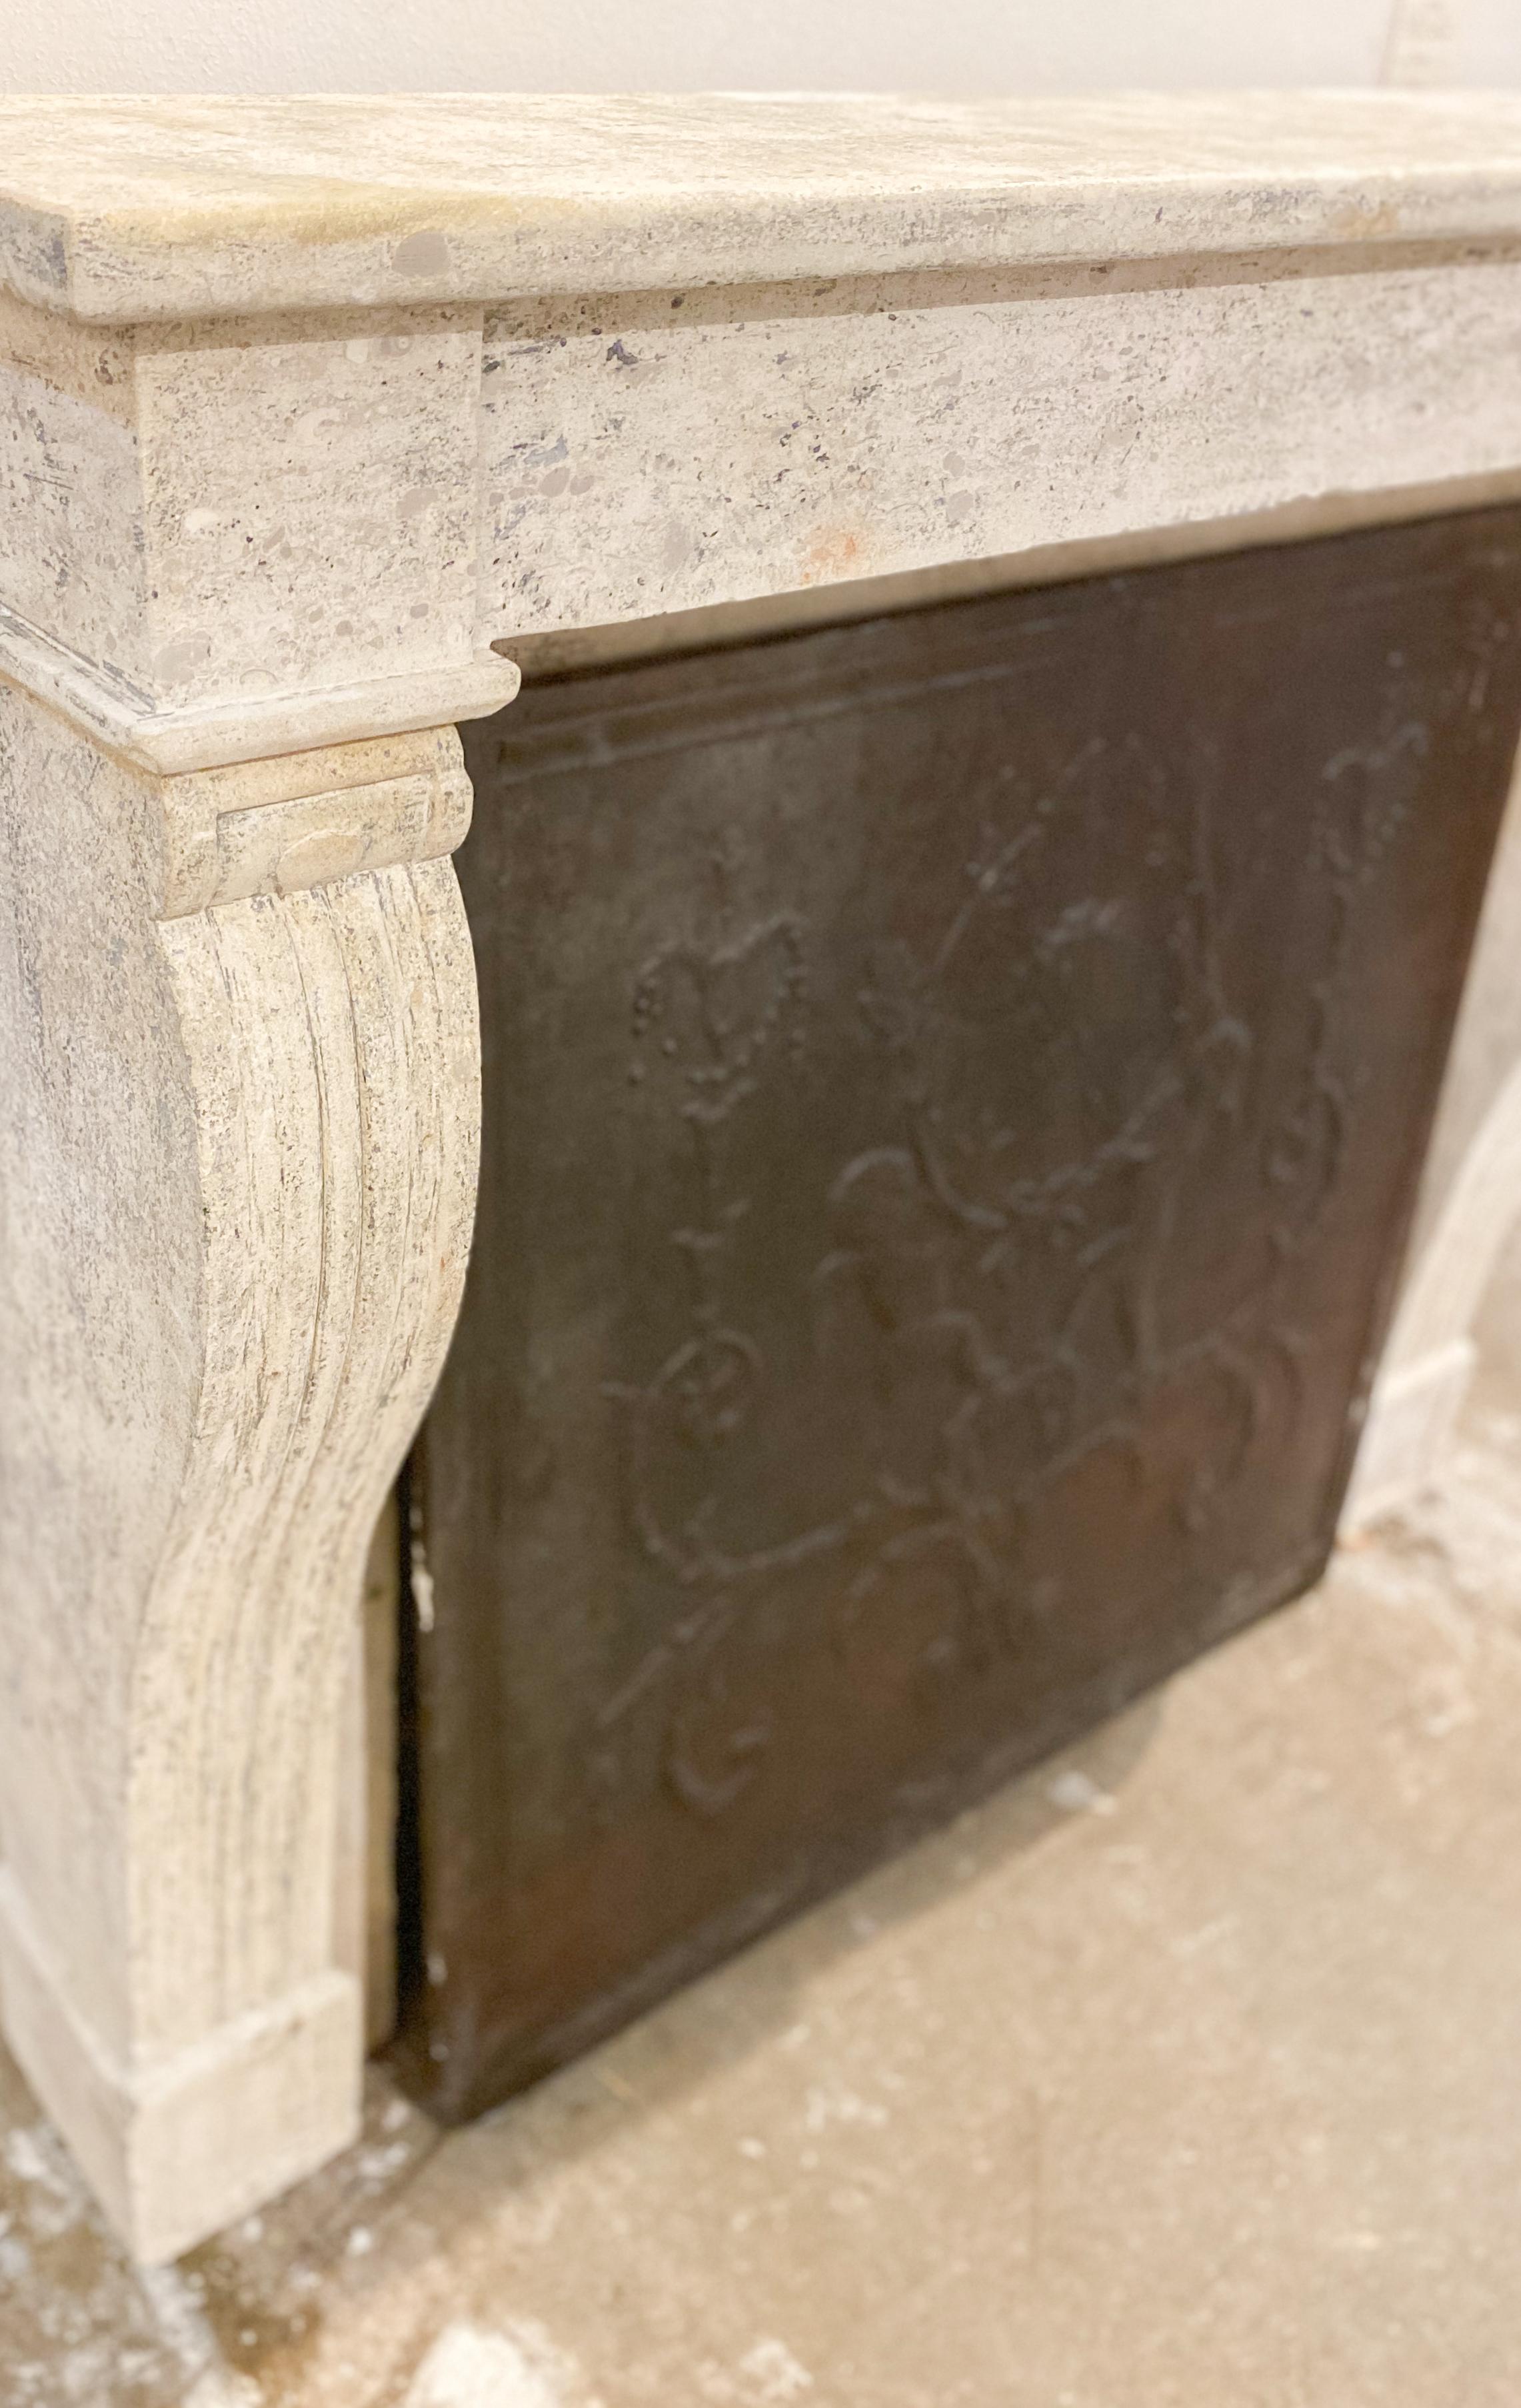 This limestone mantel dates back to 1800 and features an eviable natural patina. 

Measurements: 51” W x 13” D x 44” H
Firebox: 40” W x 38” H.